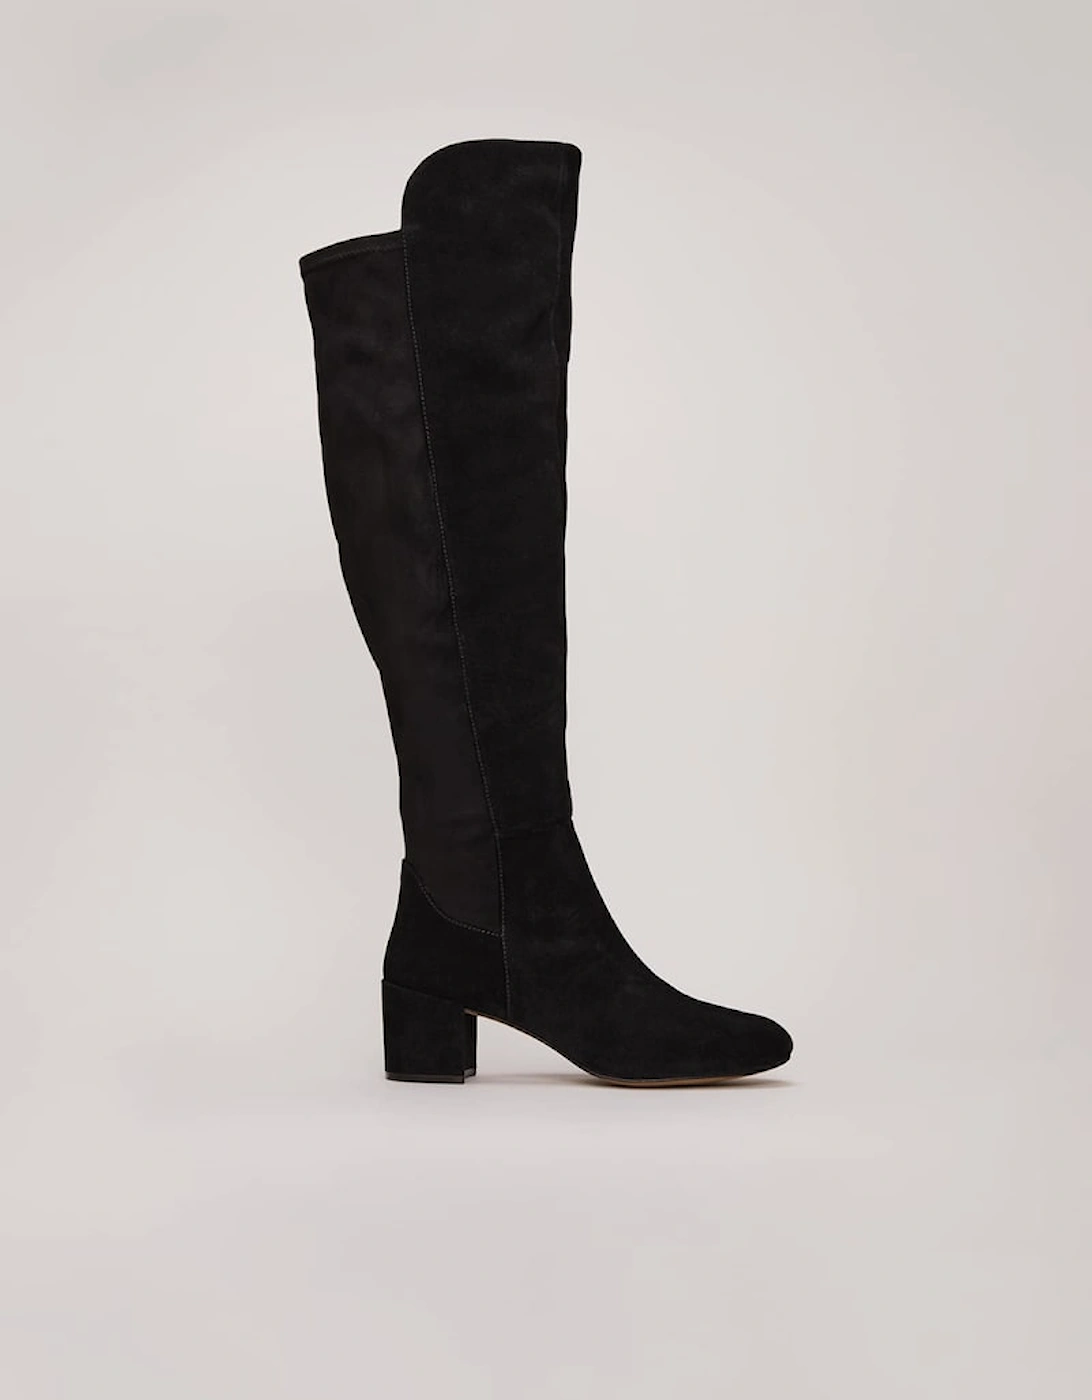 Milly Black Leather Knee High Boots, 2 of 1